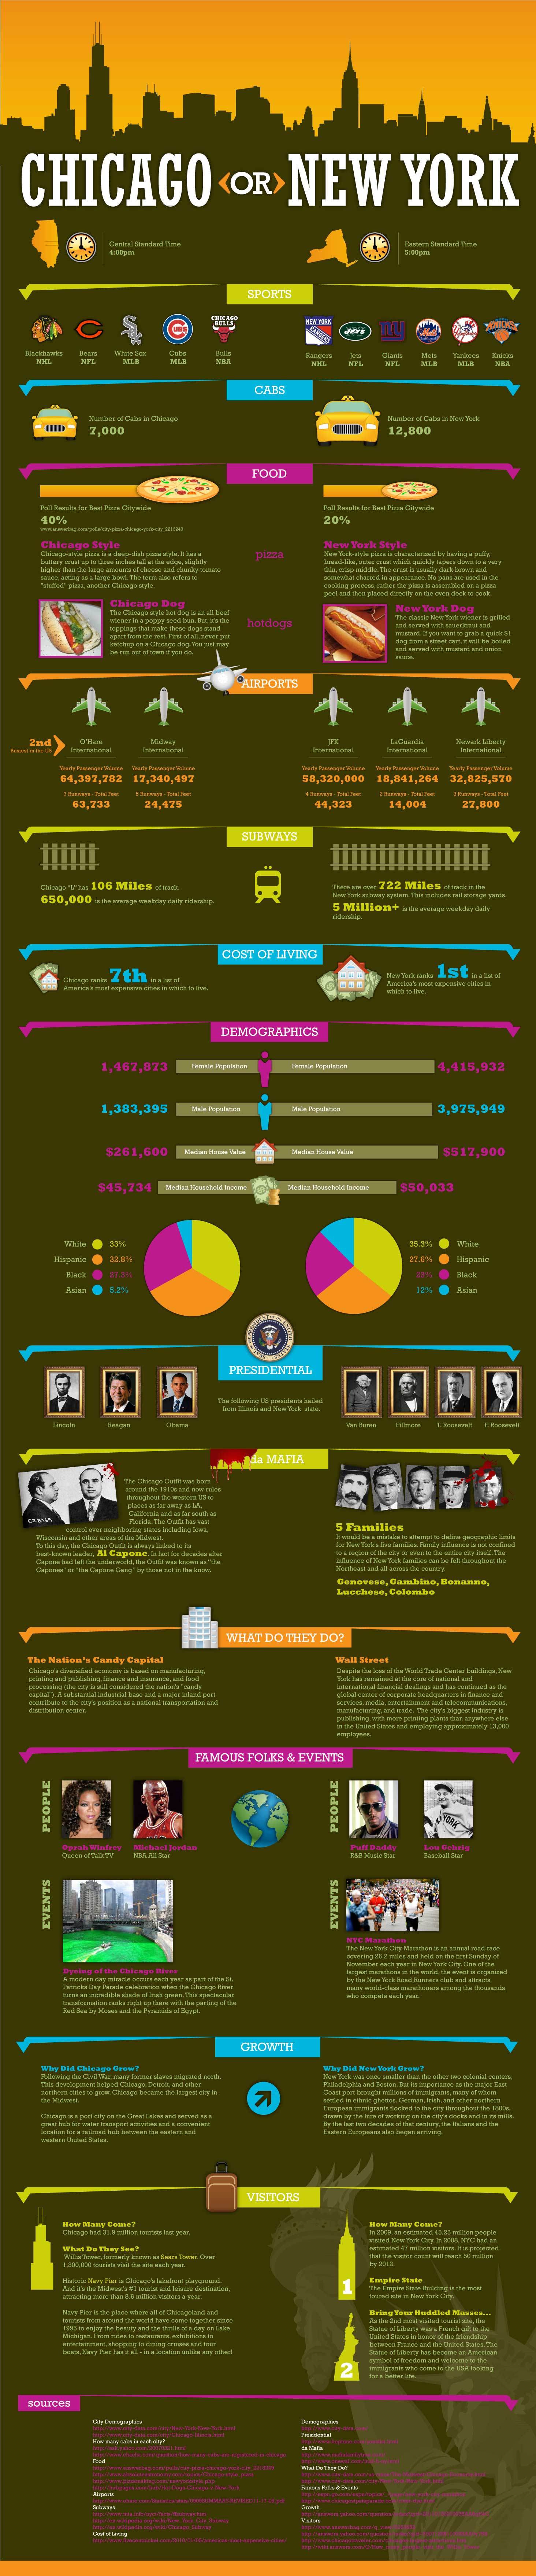 chicago_or_newyork_infographic